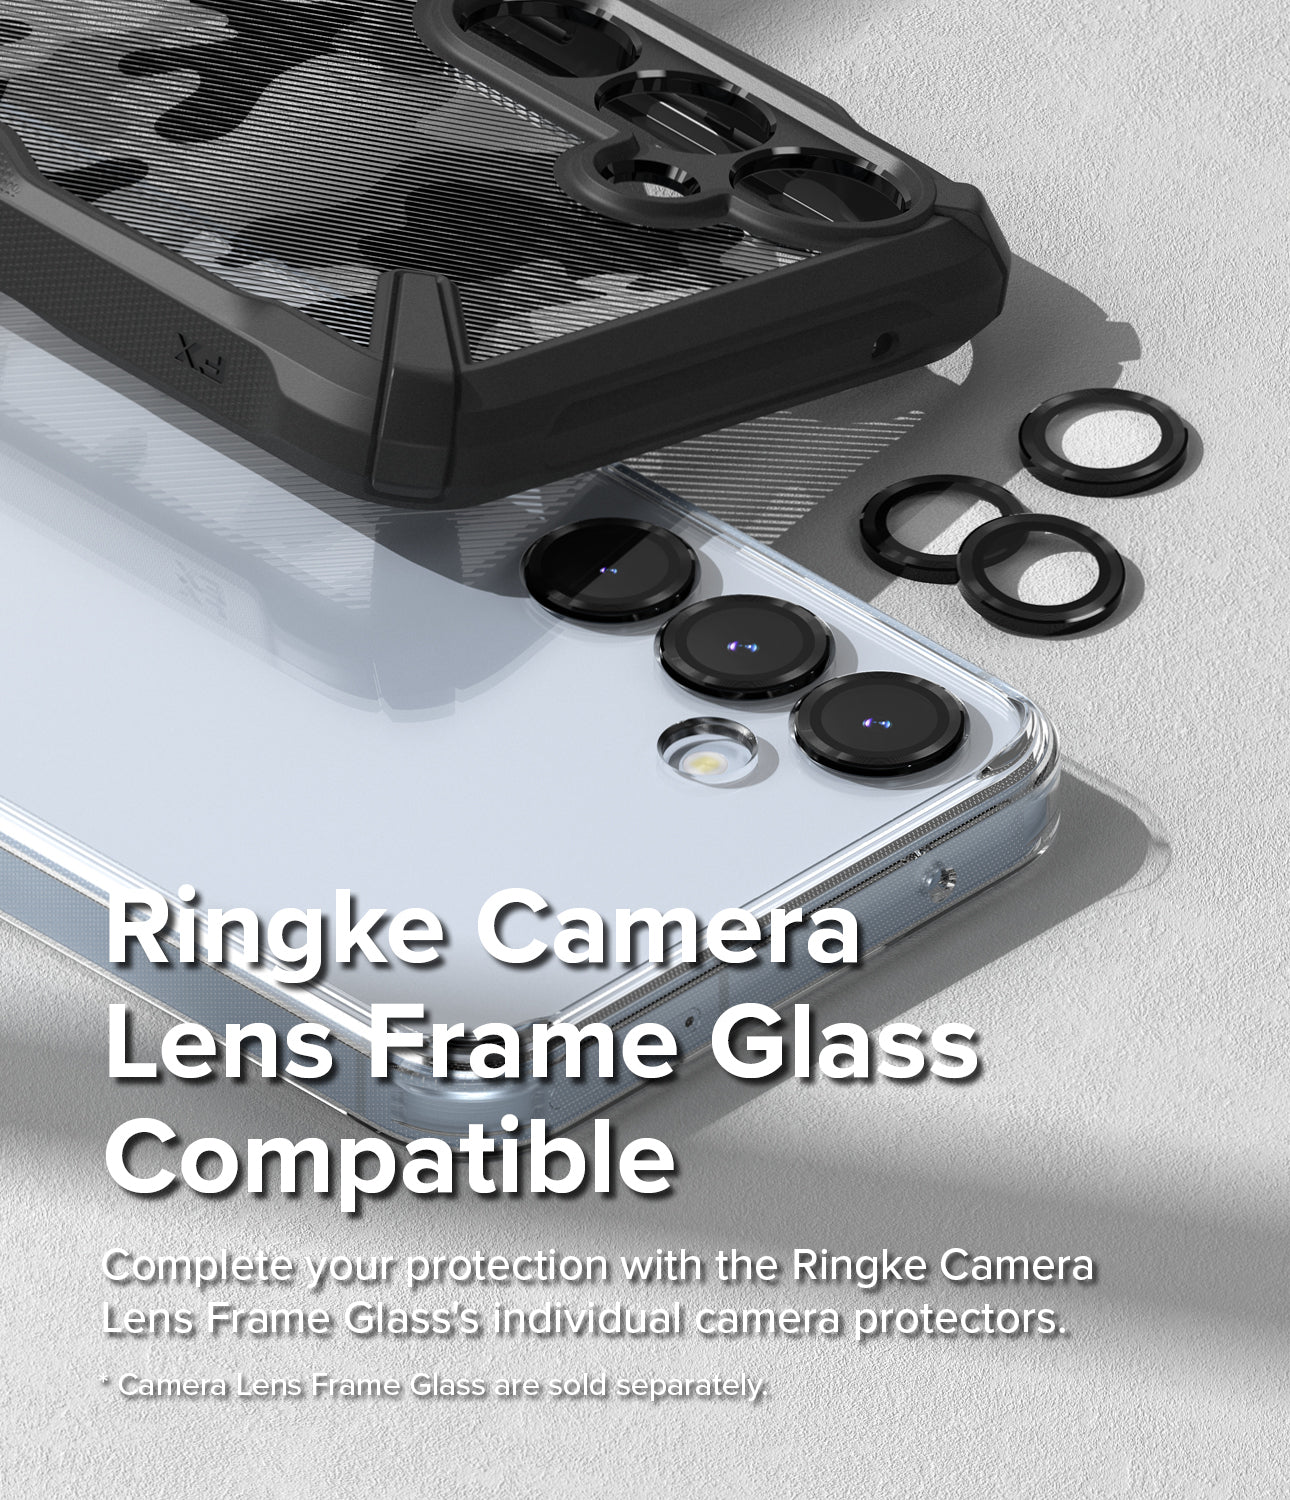 Galaxy A55 Case | Fusion - Ringke Camera Lens Frame Glass Compatible. Complete your protection with the Ringke Camera Lens Frame Glass' individual camera protectors.